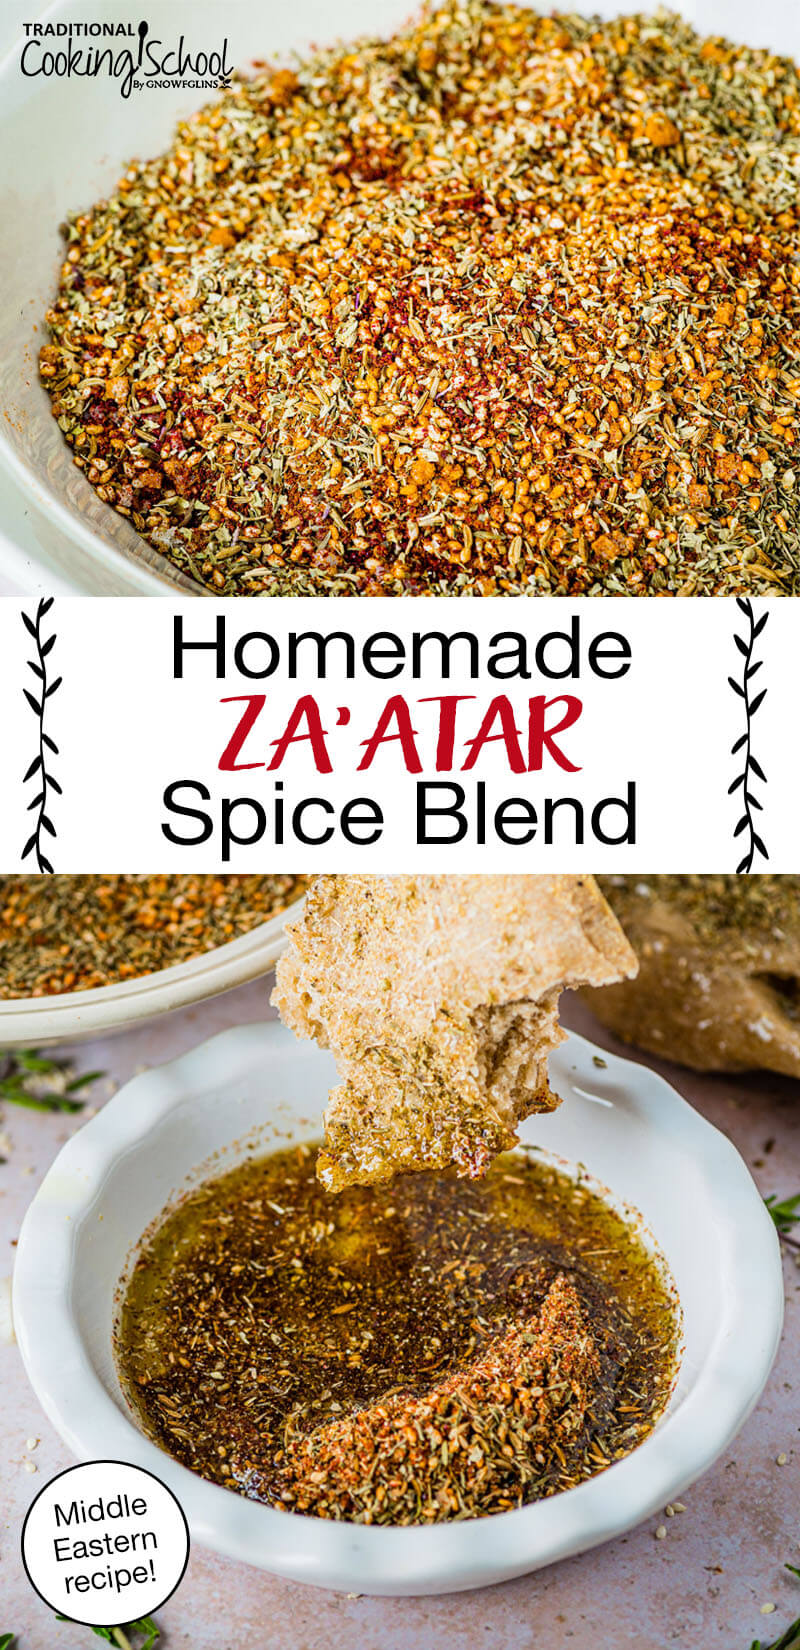 Photo collage of za'atar spice blend in a bowl, with pieces of manakish being dipped into another bowl filled with za'atar and olive oil. Text overlay says: "Homemade Za'atar Spice Blend (Middle Eastern recipe!)"